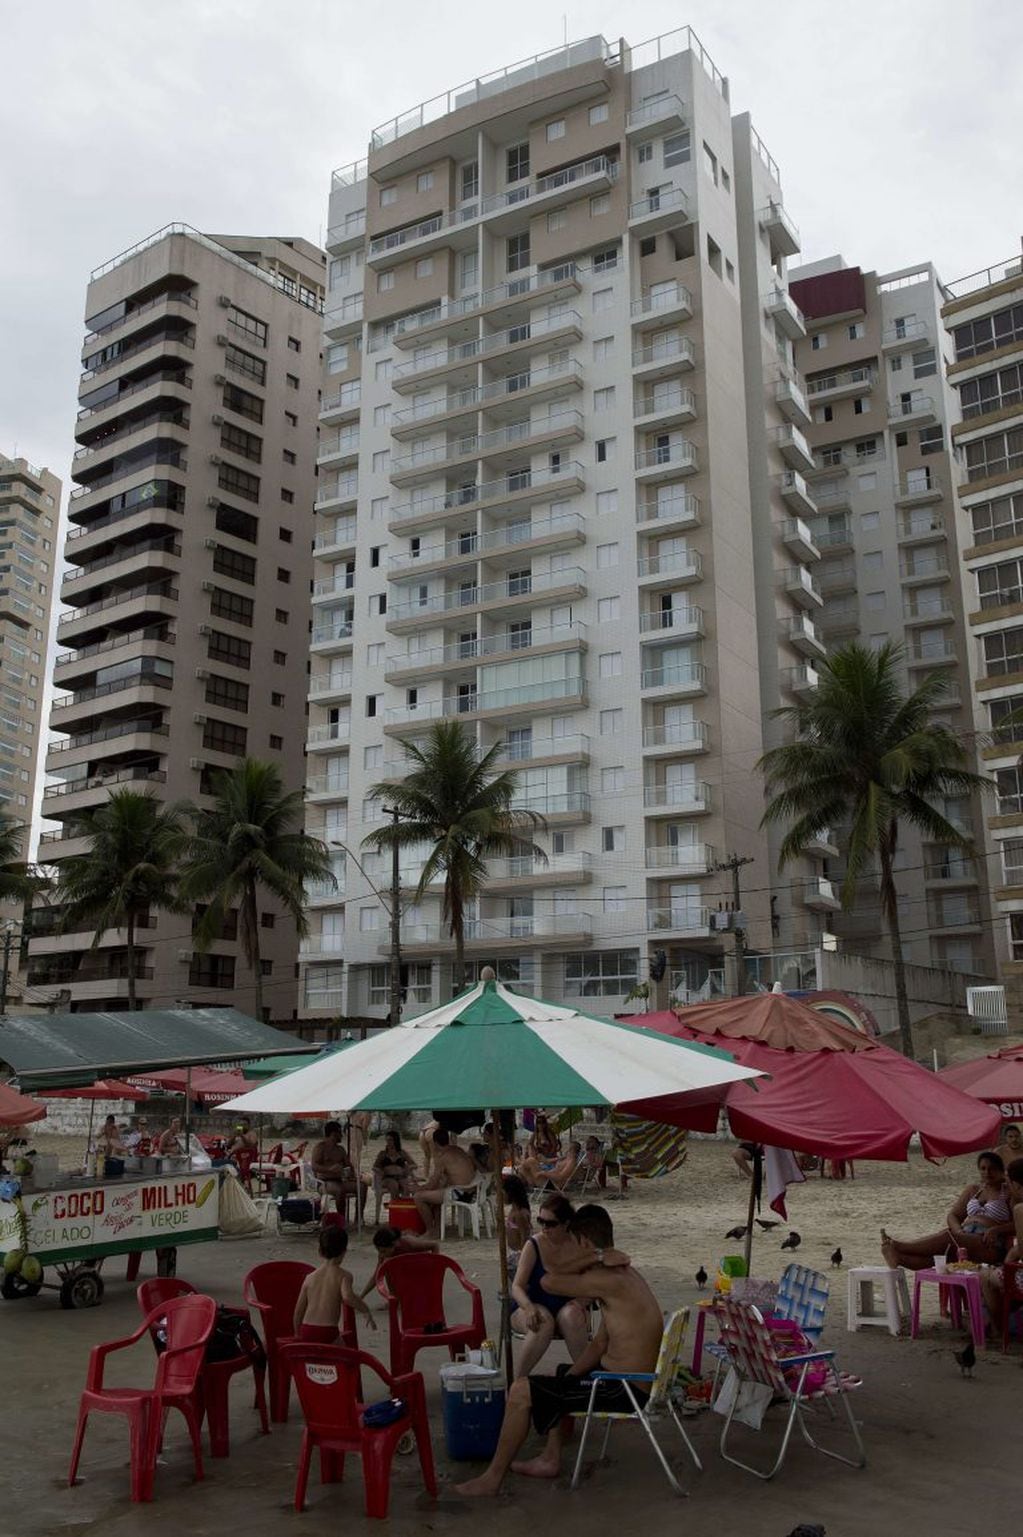 A view of the Solaris luxury seaside flat (C) --where former Brazilian President Luiz Inacio Lula Da Silva allegedly owns a triplex apartment-- at Asturias beach in Guaruja, some 90 km from Sao Paulo, Brazil, on March 10, 2016. On the eve, prosecutors in the state of Sao Paulo charged Lula Da Silva with hiding ownership of a luxury triplex apartment in the city of Guaruja, and other money-laundering charges. If the charges are approved by the court, Lula will become the target of legal action.  AFP PHOTO / NELSON ALMEIDA
 brasil Guaruja  brasil escandalo corrupcion expresidente de la nacion departamento triplex perteneciente al expresidente Lula en playa asturias